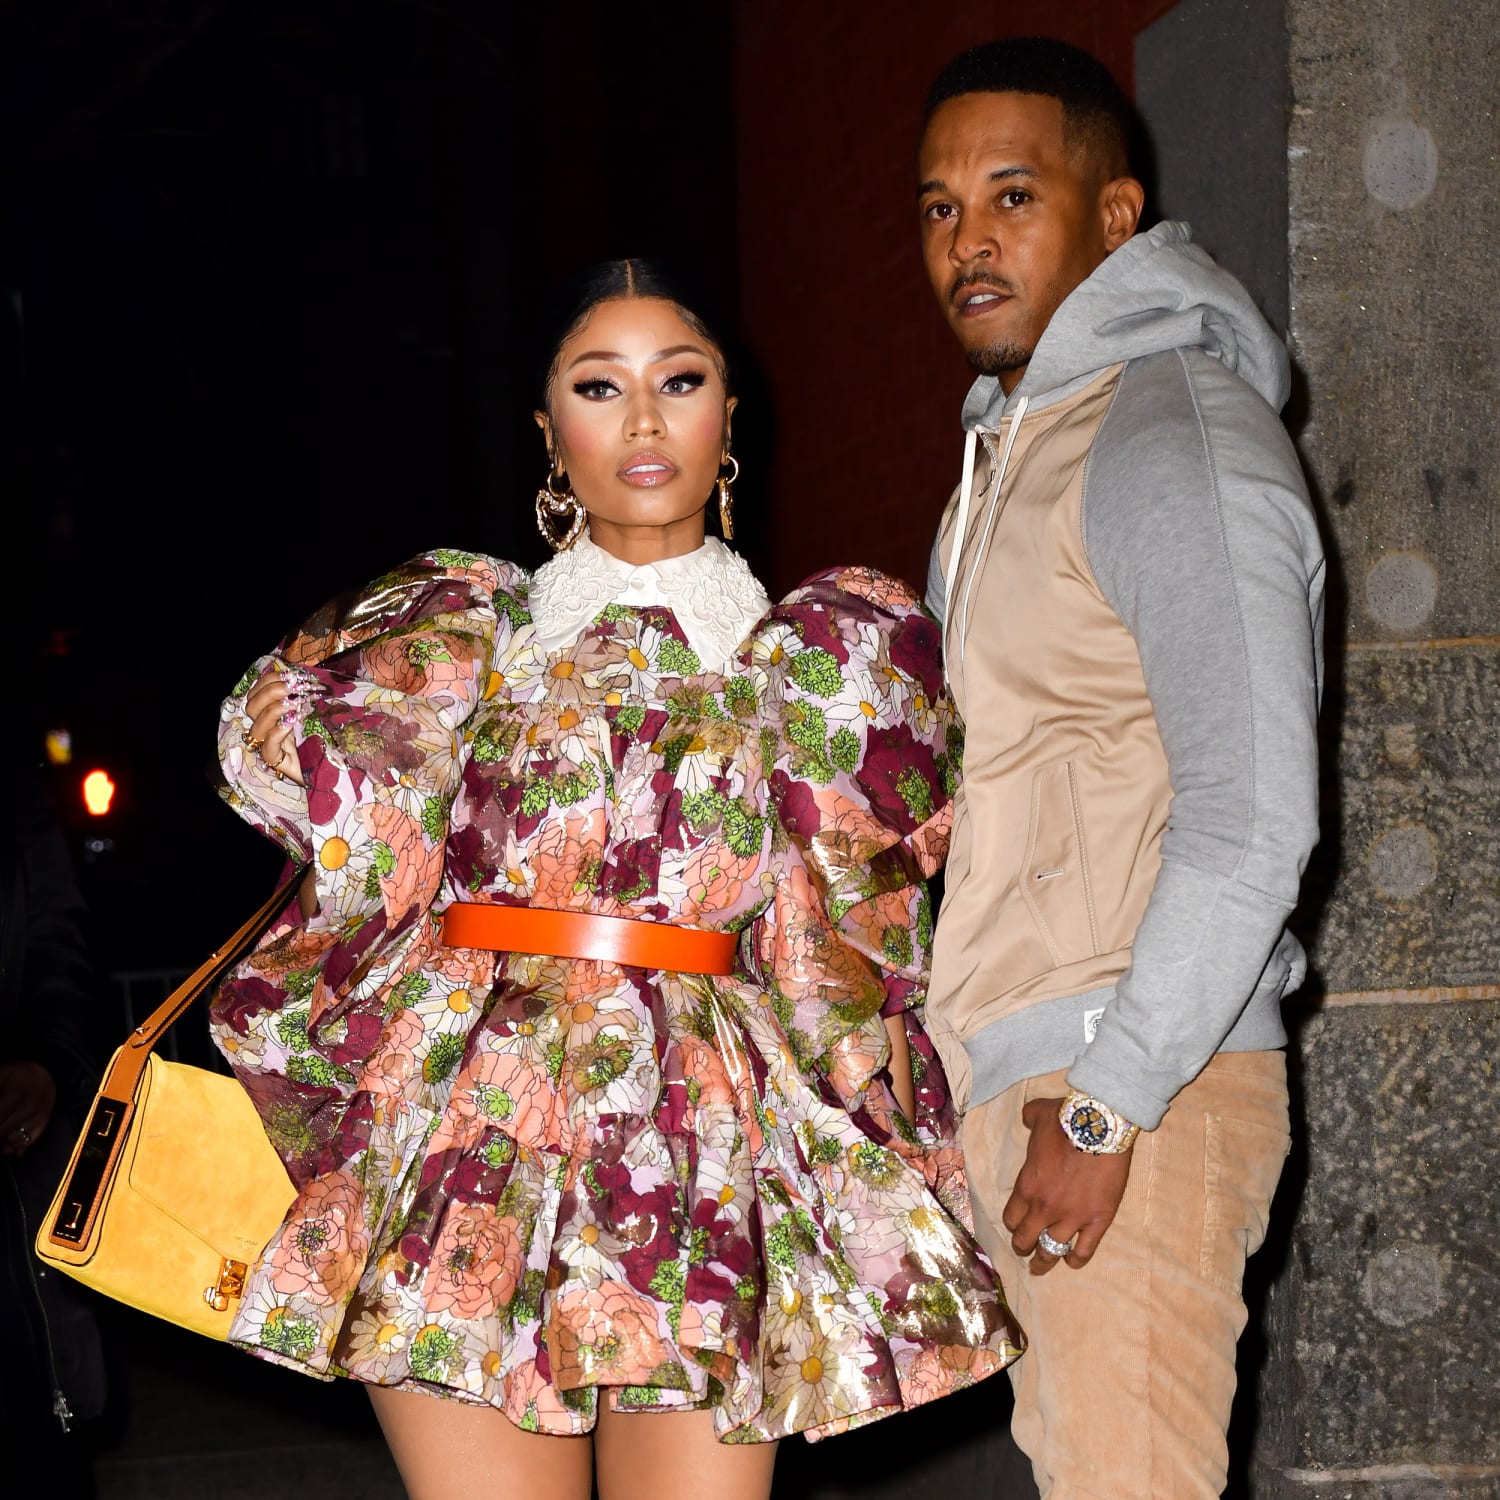 Nicki Minaj's husband sentenced to home confinement for failing to register  as sex offender